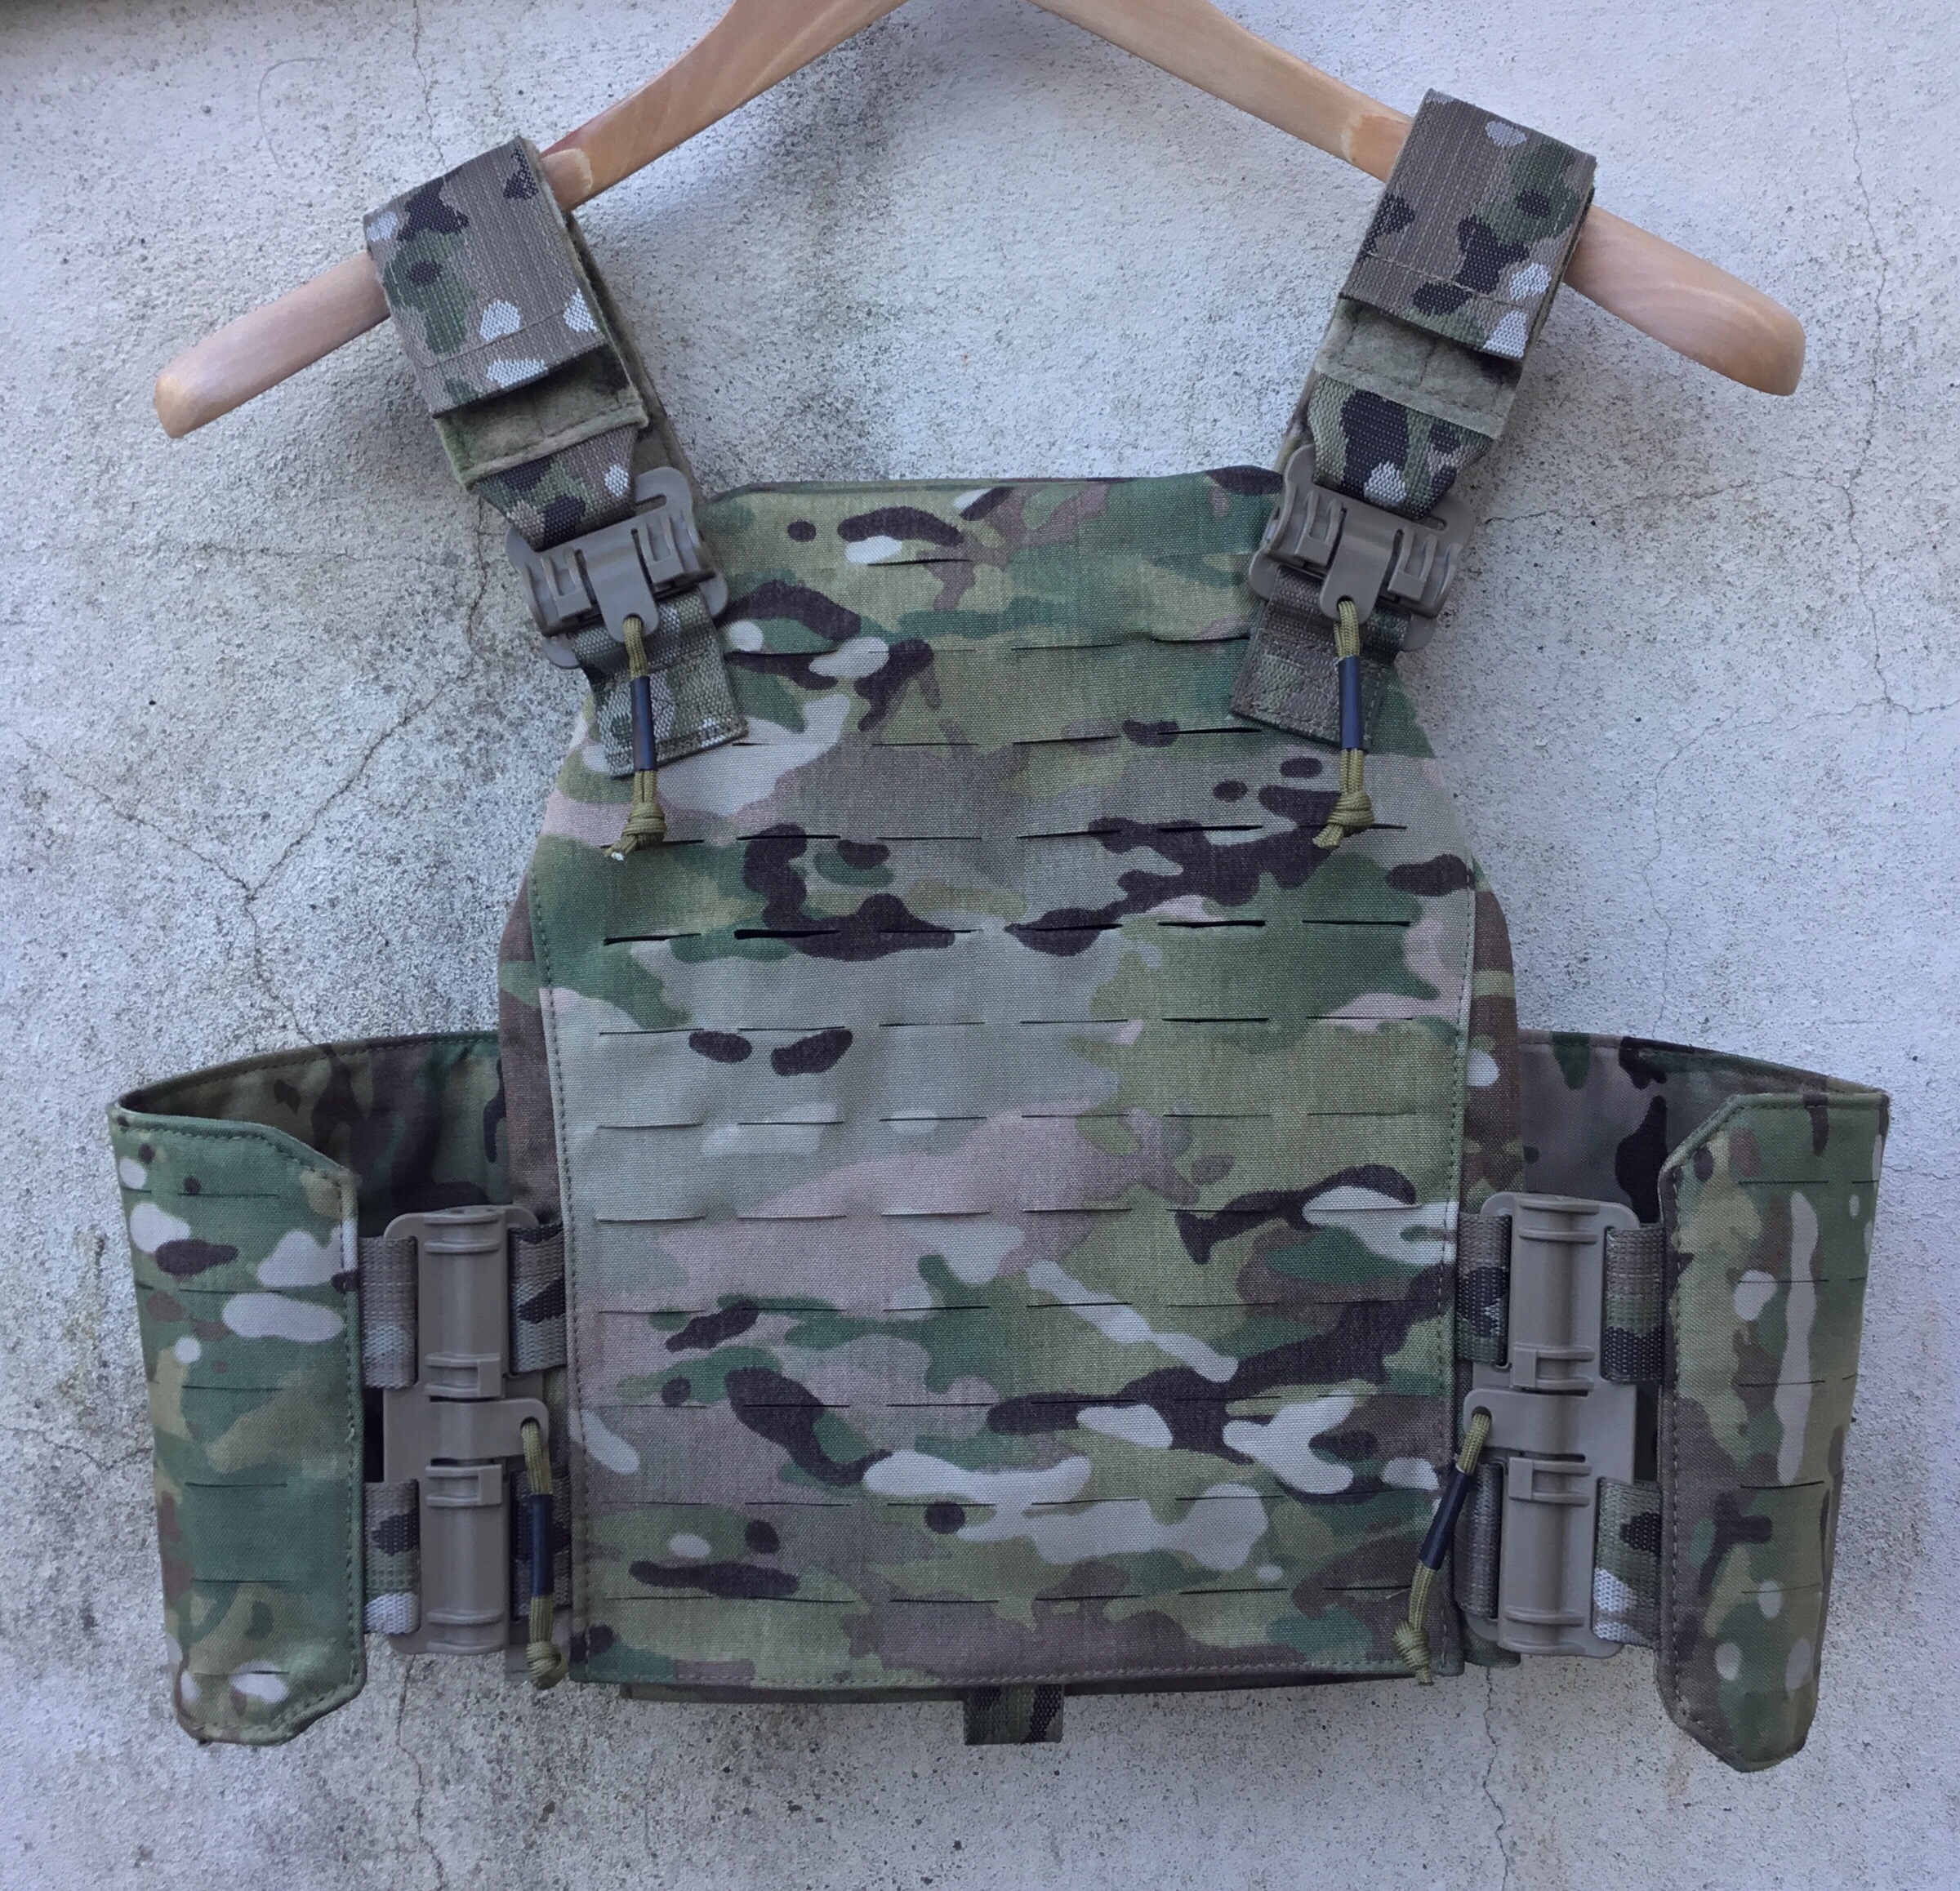 REVIEW: SKD/First Spear Six Twelve Tubes (STT) Plate Carrier – The